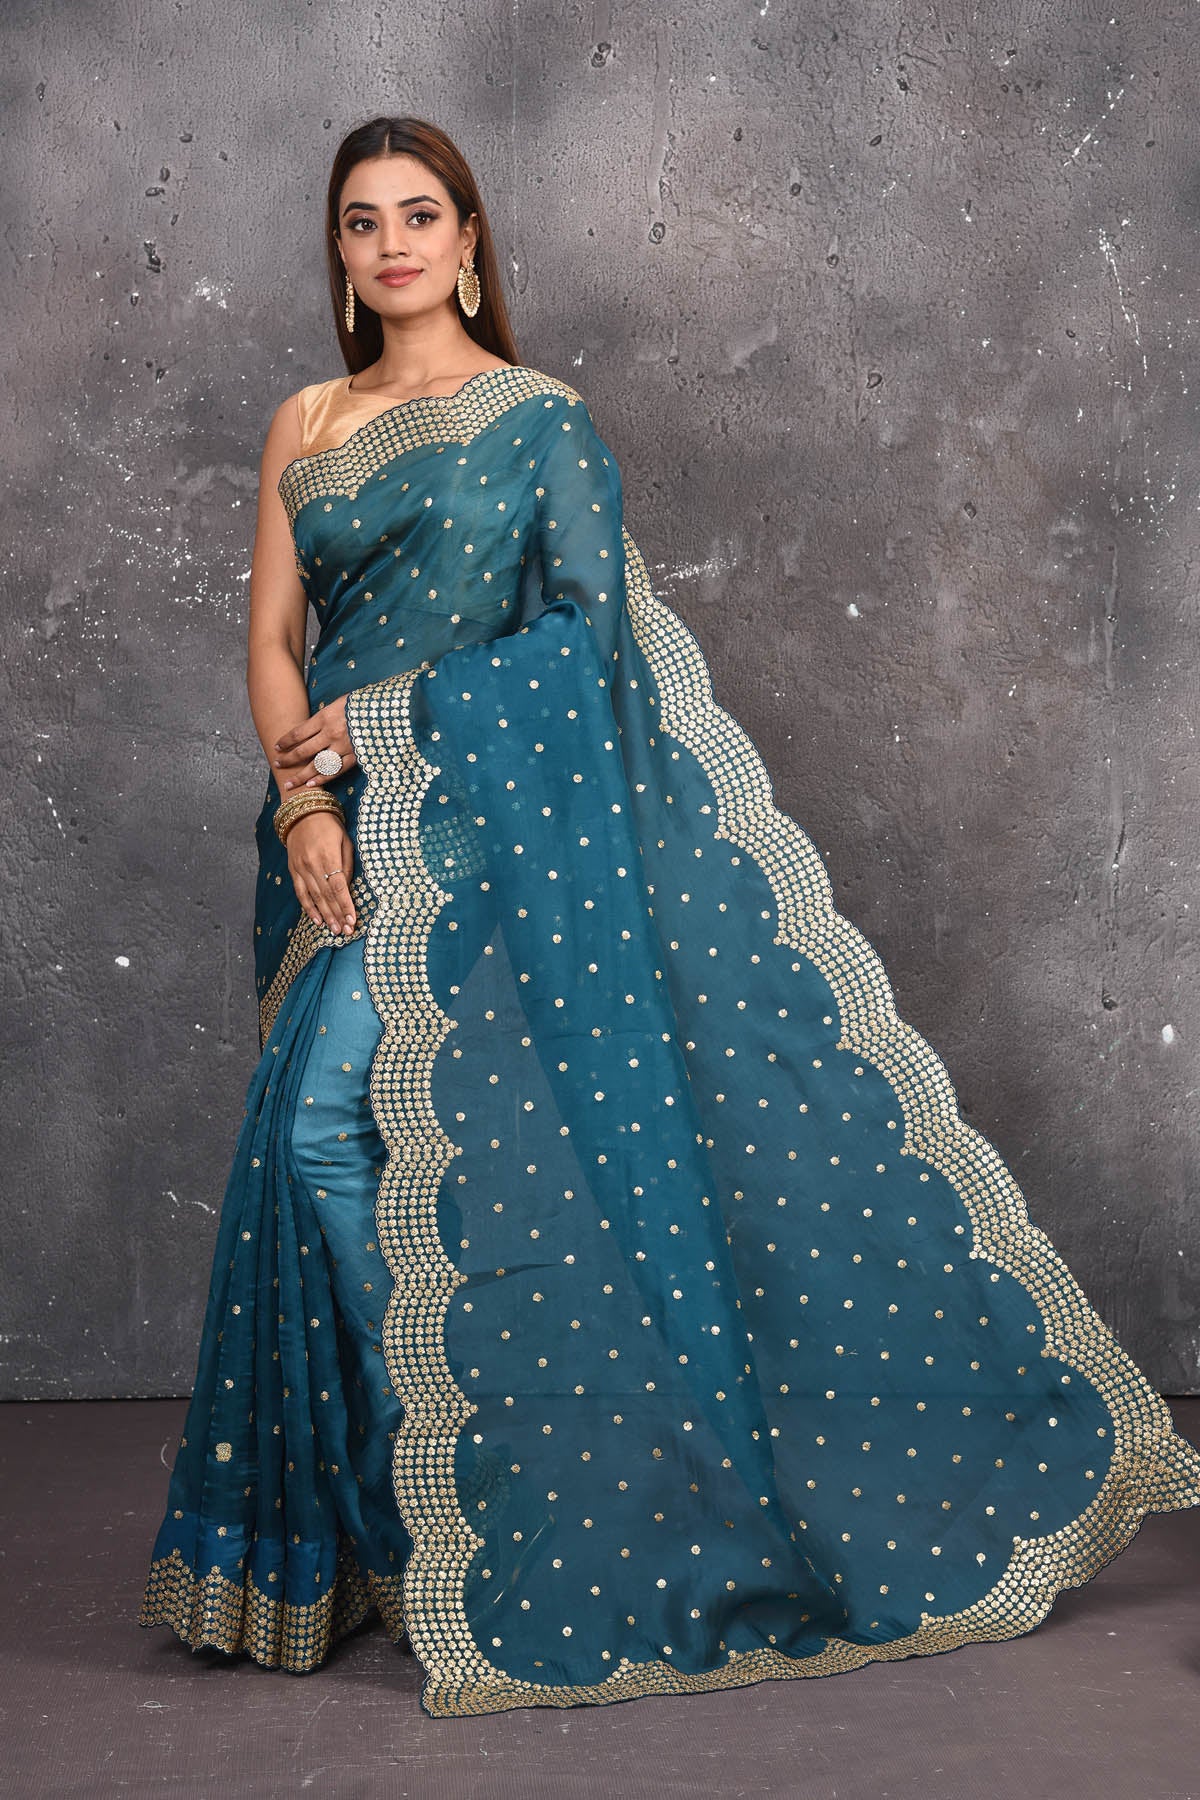 Buy exquisite blue organza saree with golden embroidered online in USA. Pure organza sarees by Pure Elegance in blue color. It has a beautiful gold embroidered border. This organza brings the charm and simplicity of this saree with border and pallu with the delegate embroidery work on border. Shop this designer silk sari from Pure Elegance Indian fashion store in USA.-Full view.